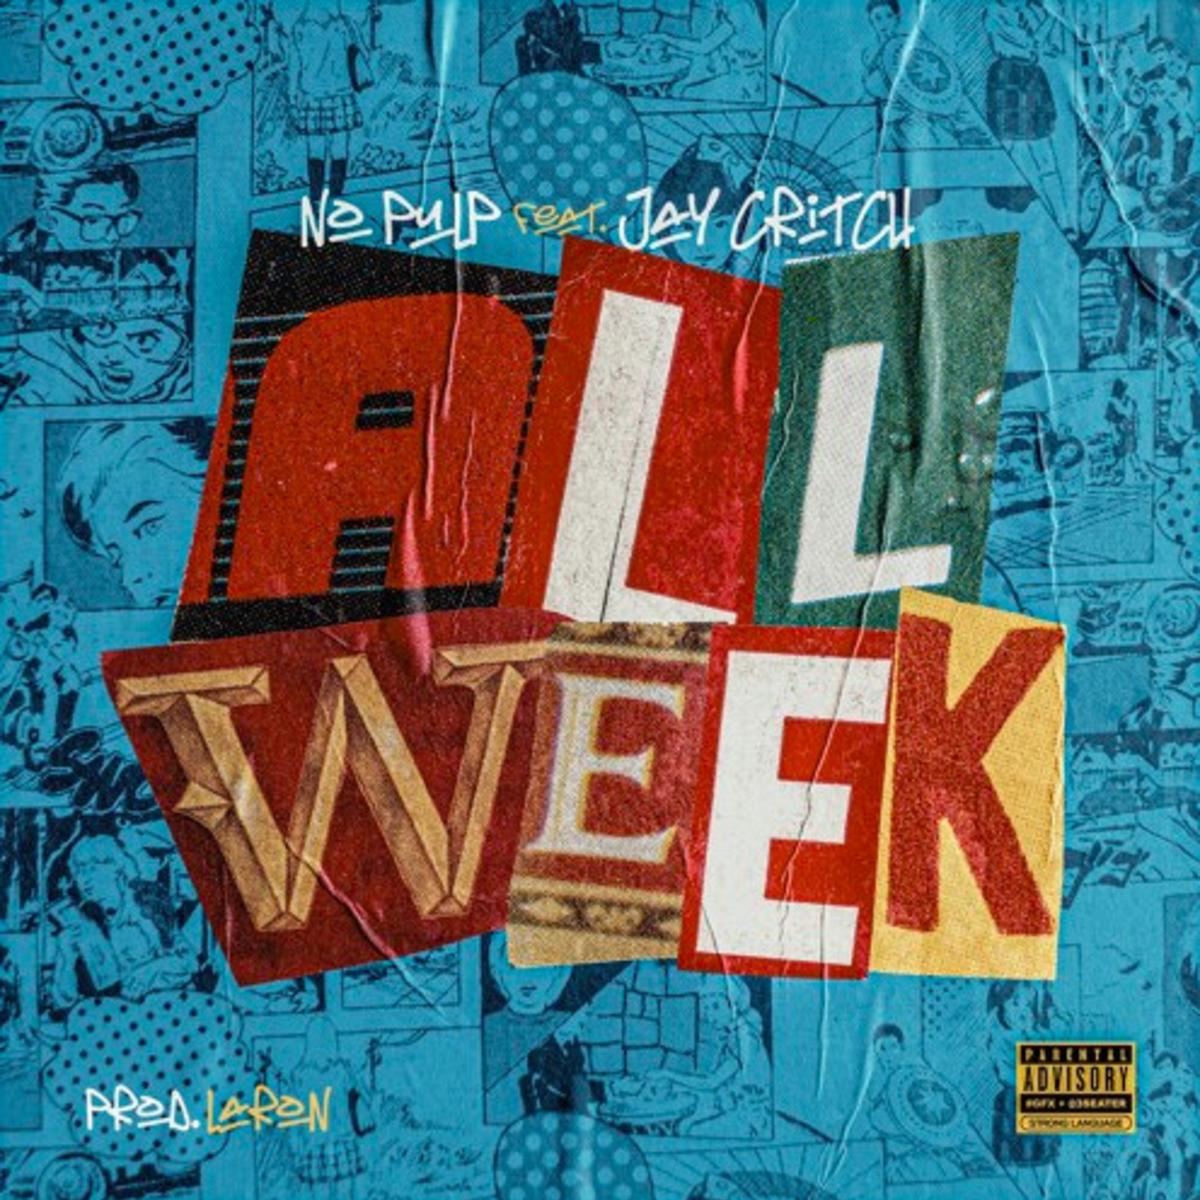 No Pulp Feat. Jay Critch – “All Week” [Audio]